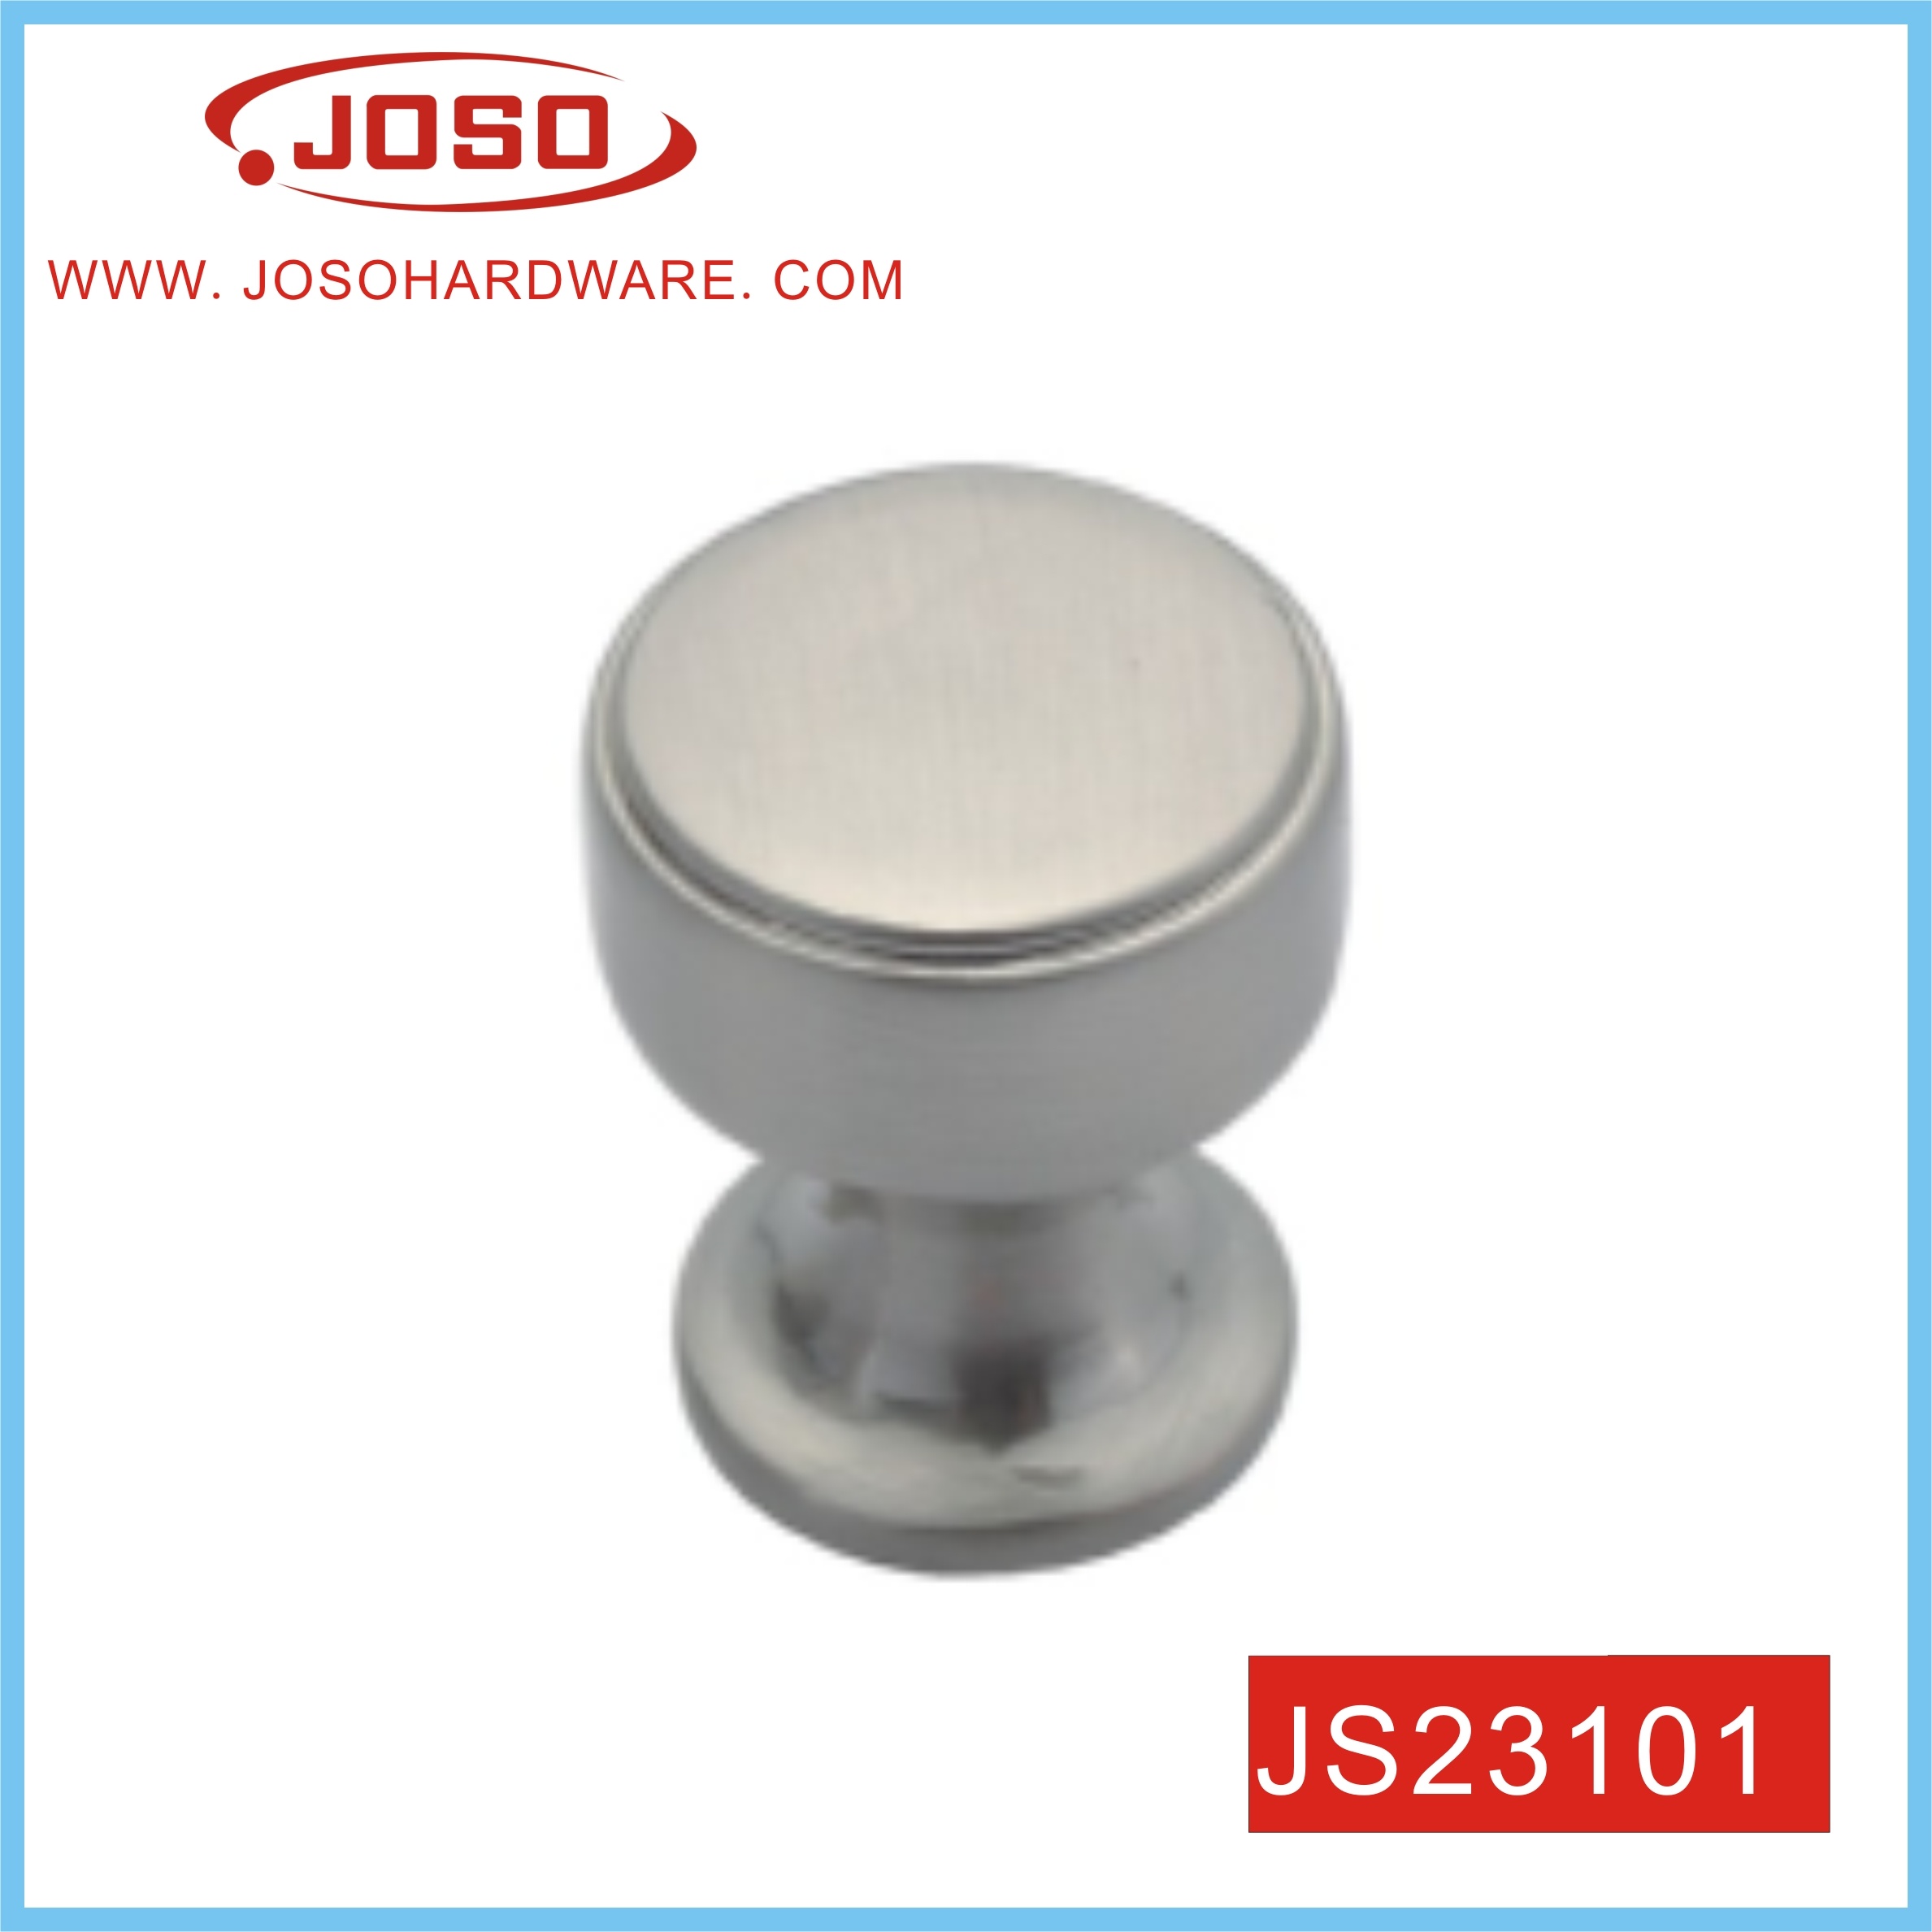 Decorative Round Pull Handle and Round Knob for Drawer